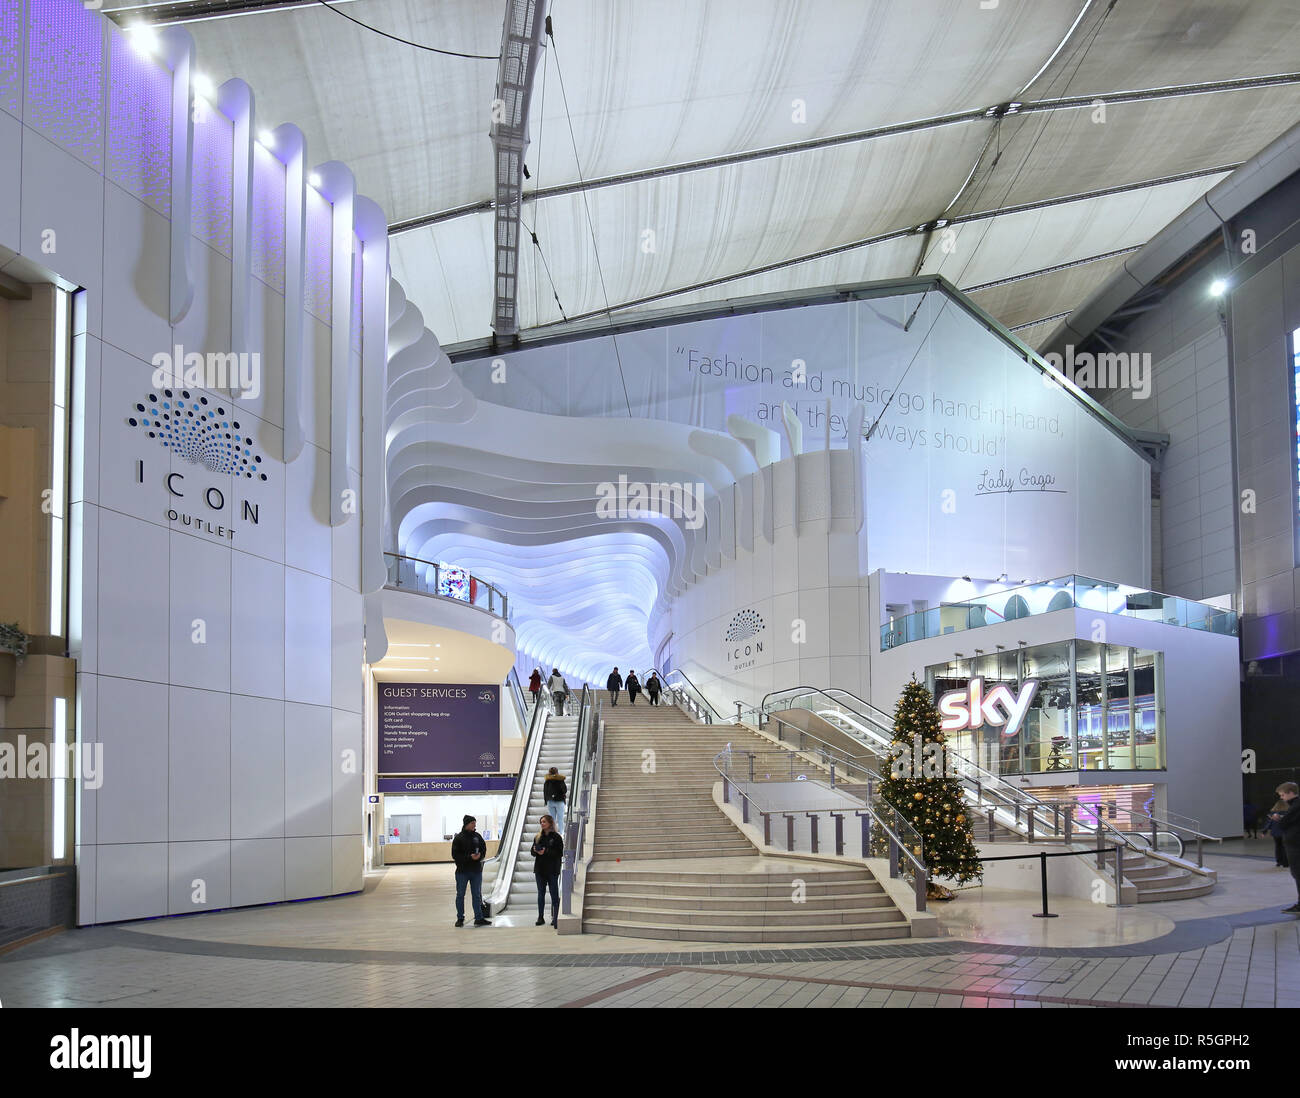 Entrance to the Icon Outlet at the O2, London. A new designer shopping mall opened Autumn 2018. Developed by AEG and Crosstree Real Estate Partners. Stock Photo